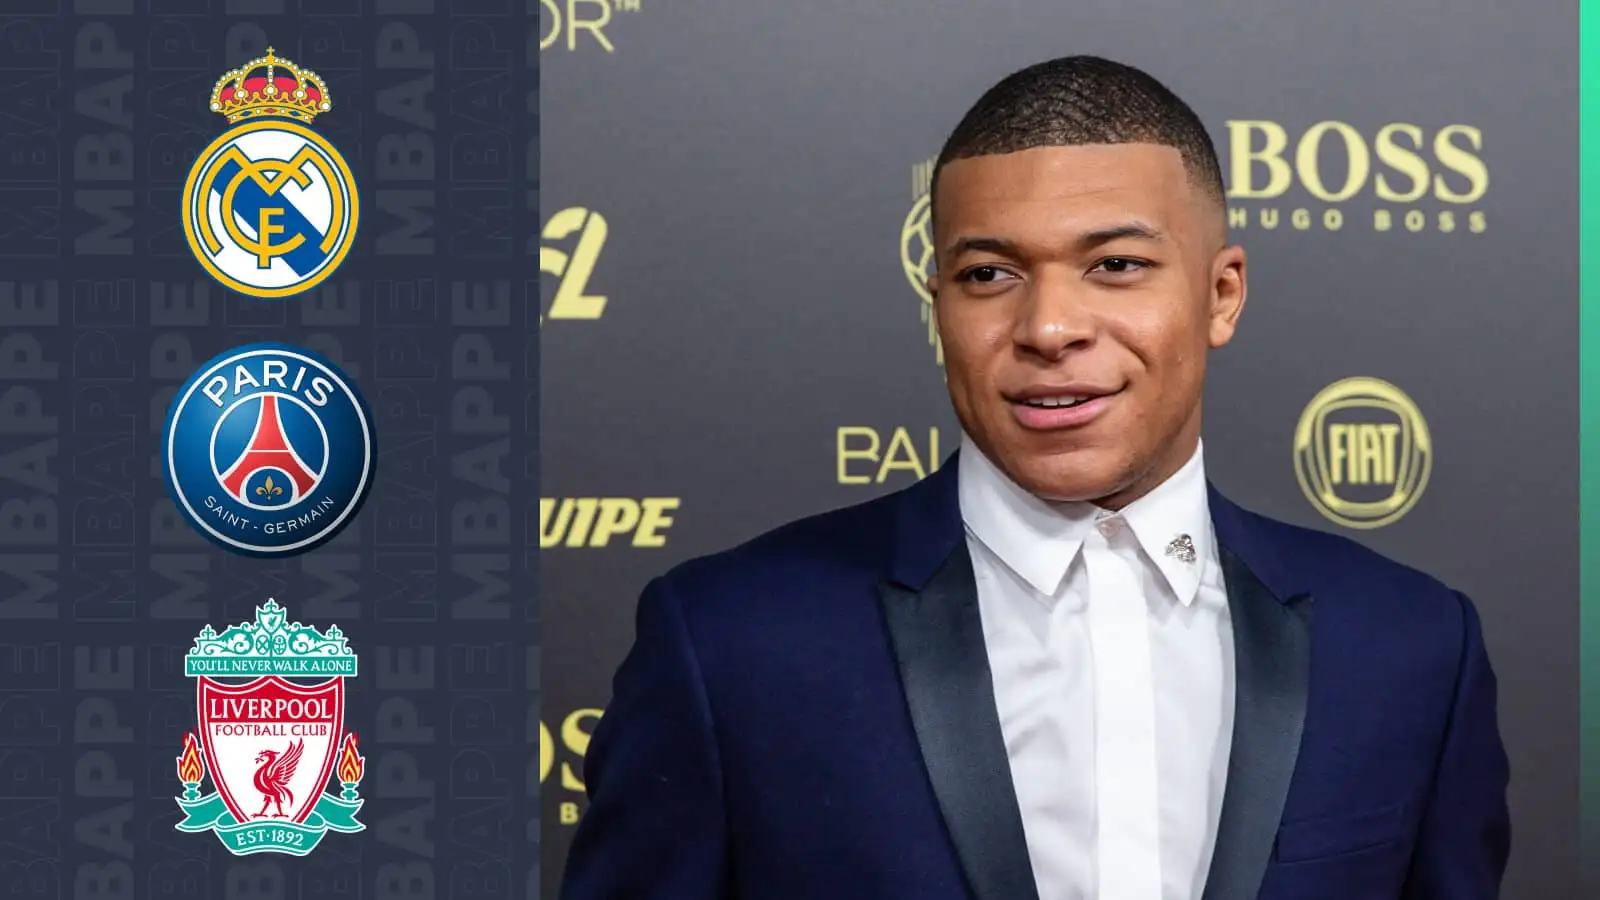 Kylian Mbappe is being linked with moves to Real Madrid and Liverpool from PSG